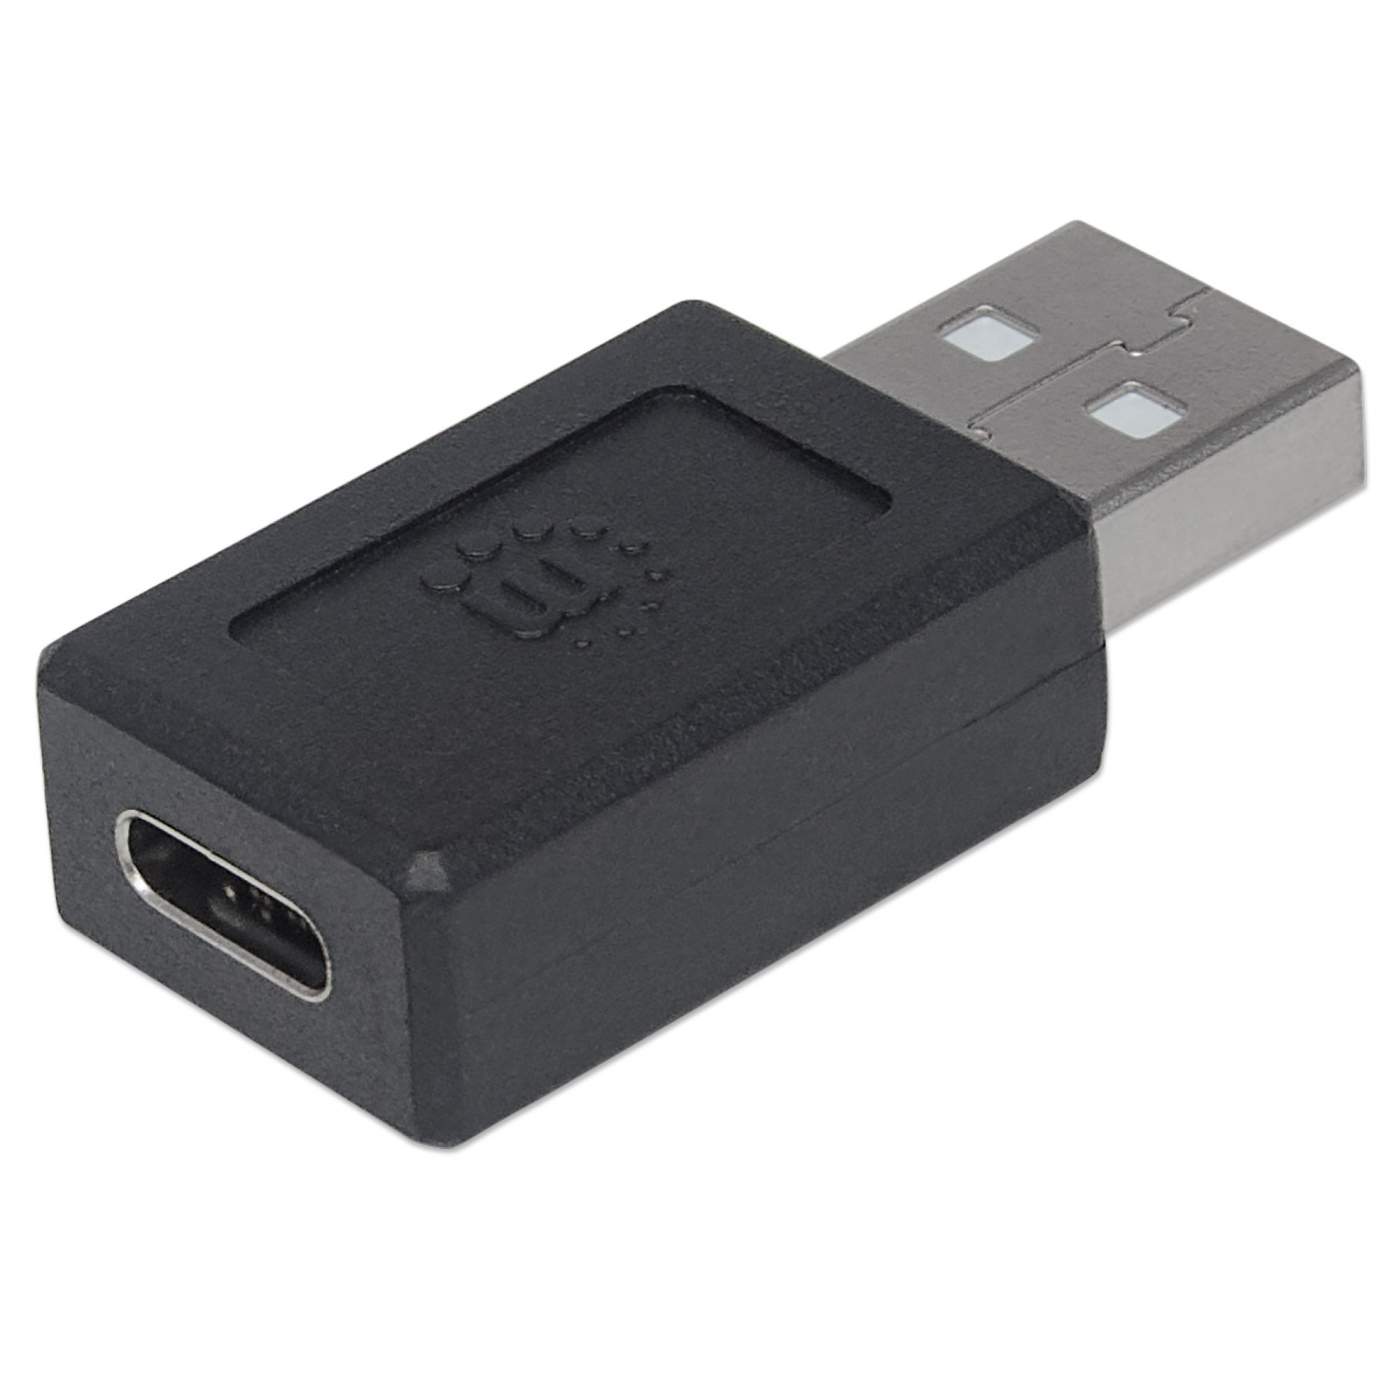 USB 2.0 Type-C to Type-A Adapter Image 5